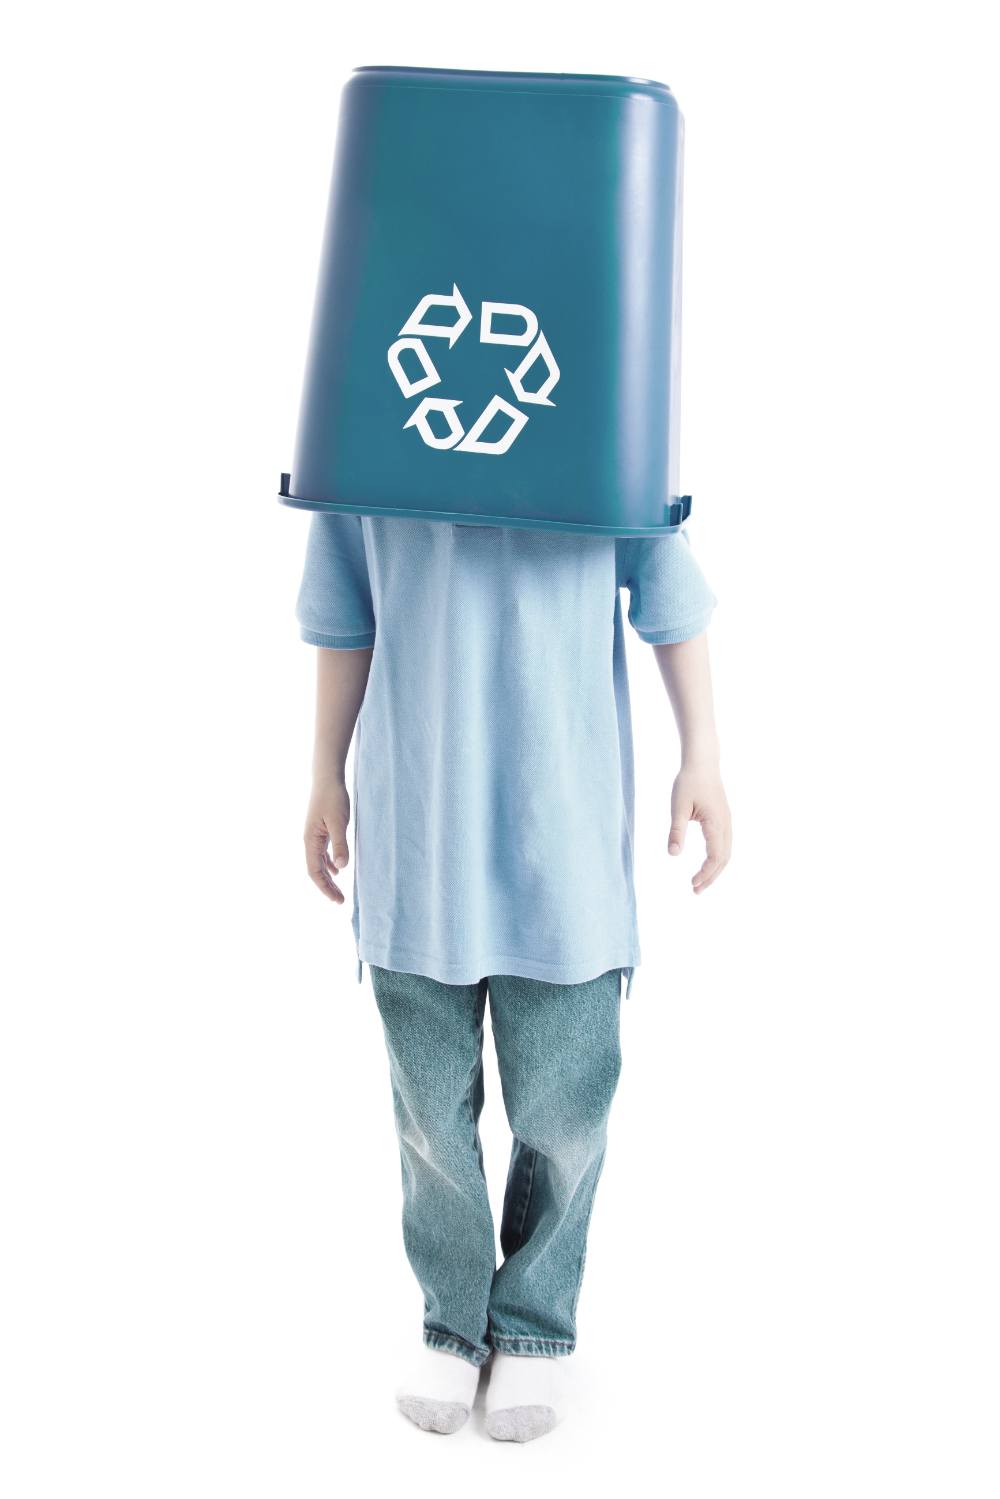 Boy With Recycle Bin On His Head